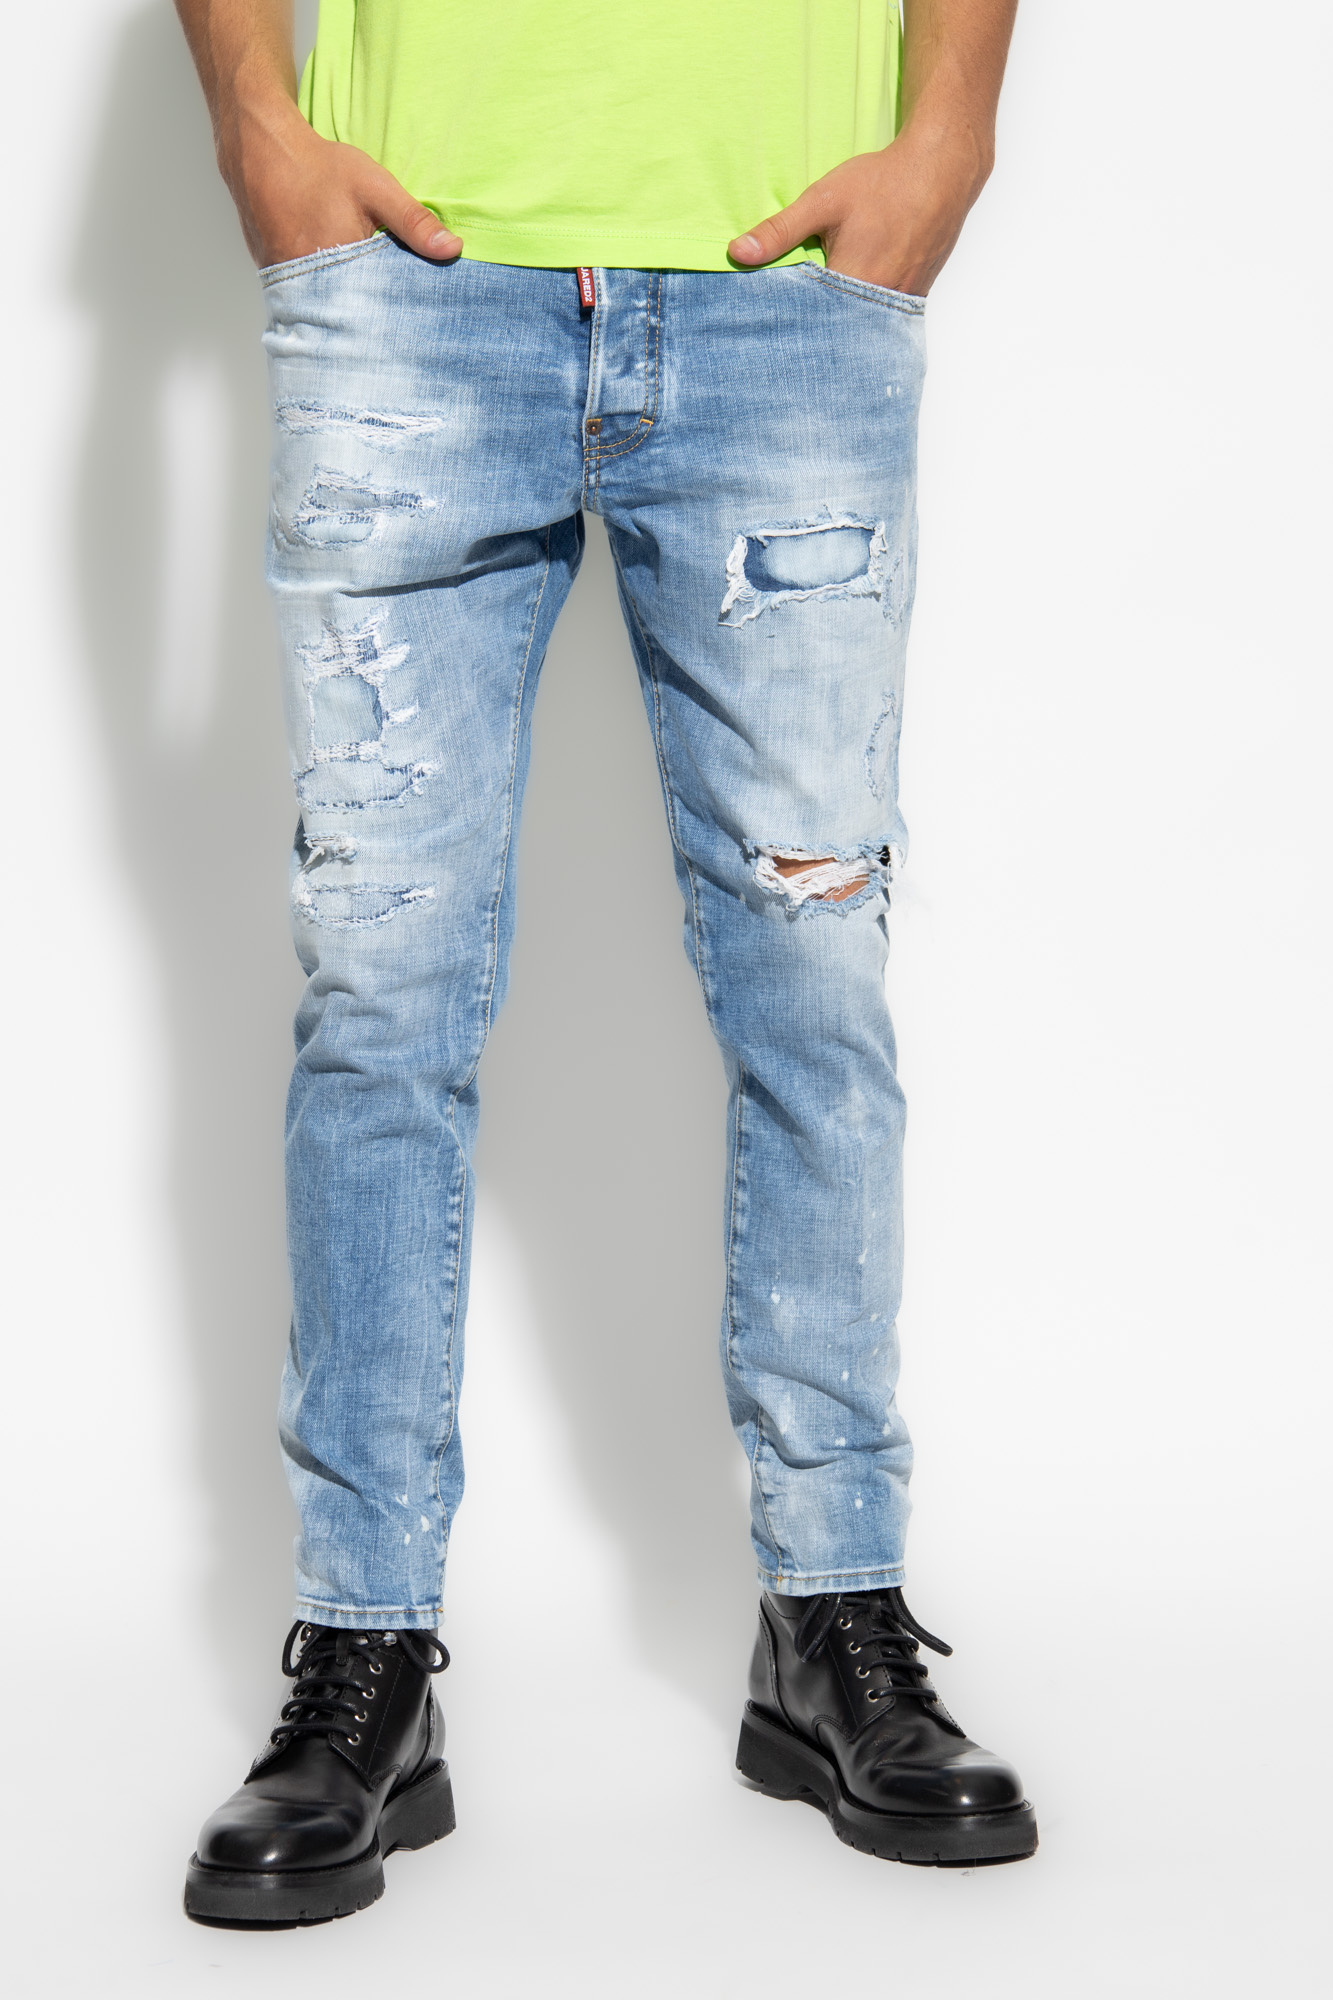 Light blue 'Skater' jeans Dsquared2 - decibel cargo jeans with straps and  exposed zippers decwb347 bkb - IetpShops Colombia